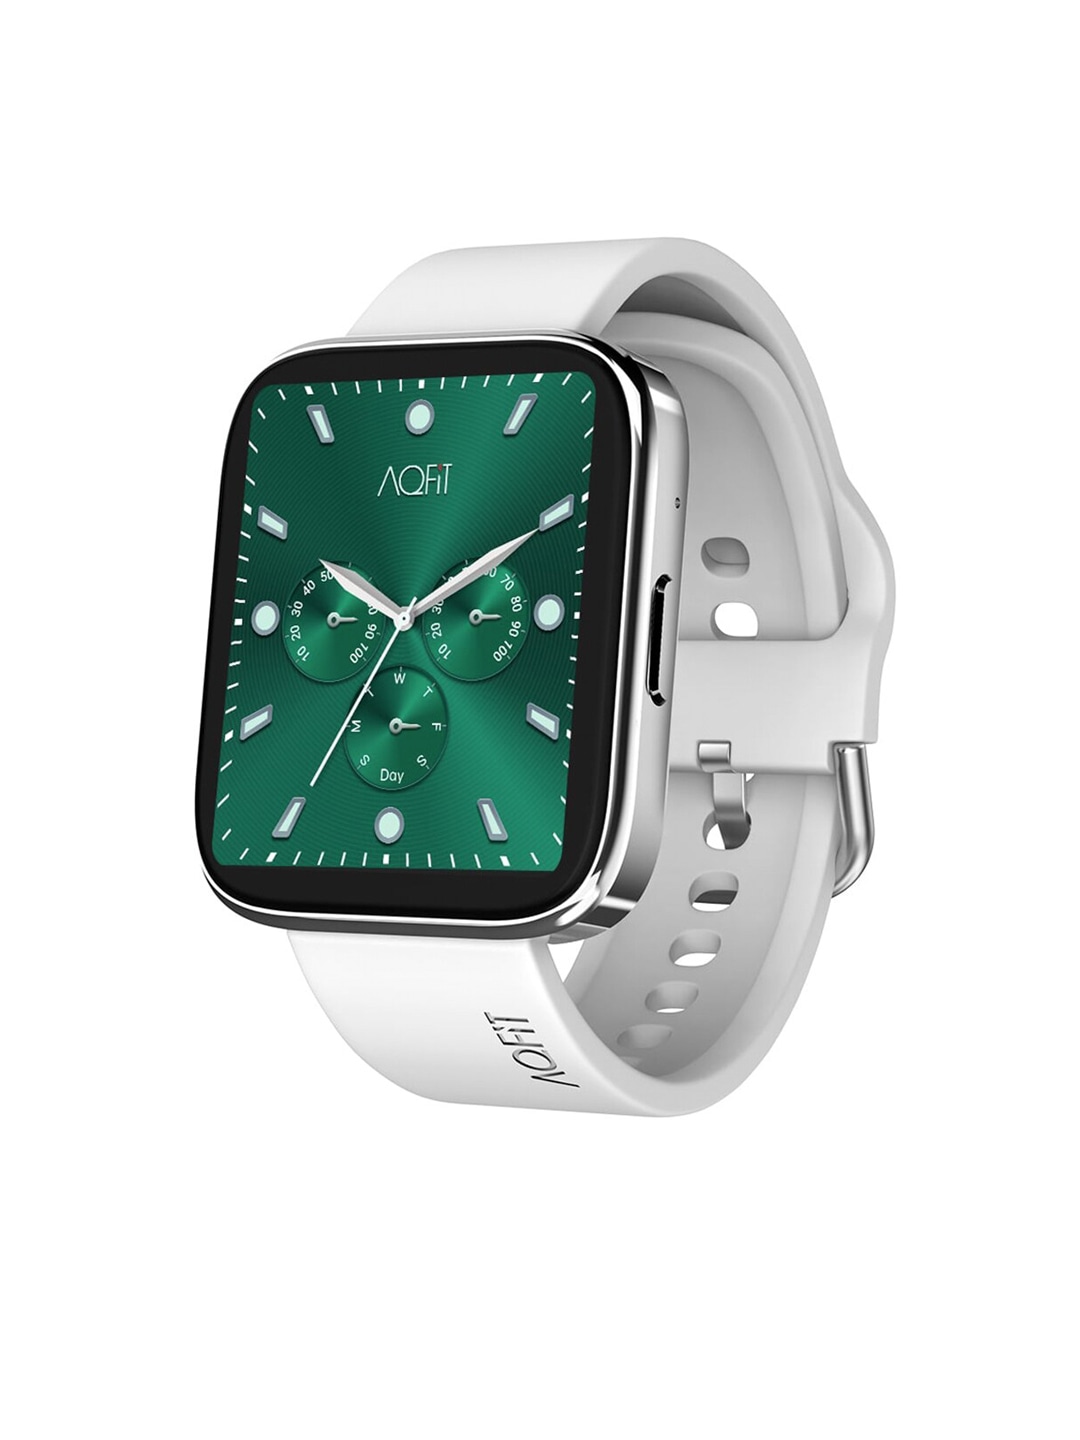 Accessories Smart Watches | AQFIT Silver & Green W9 Quad BT Calling Smart Watches - ZA46678